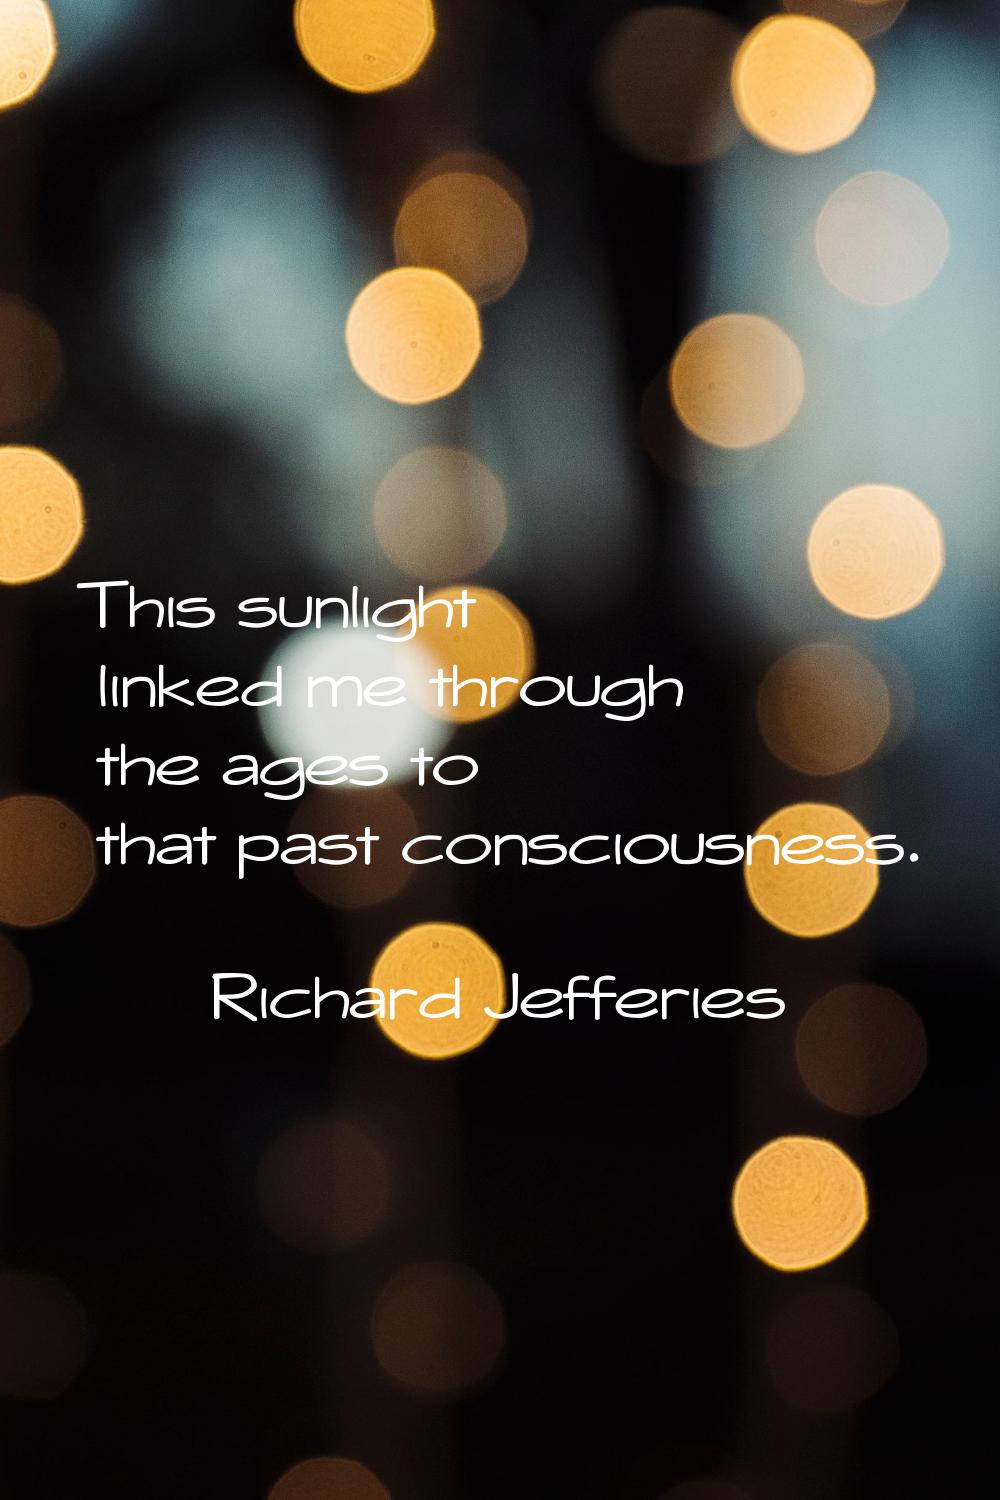 This sunlight linked me through the ages to that past consciousness.